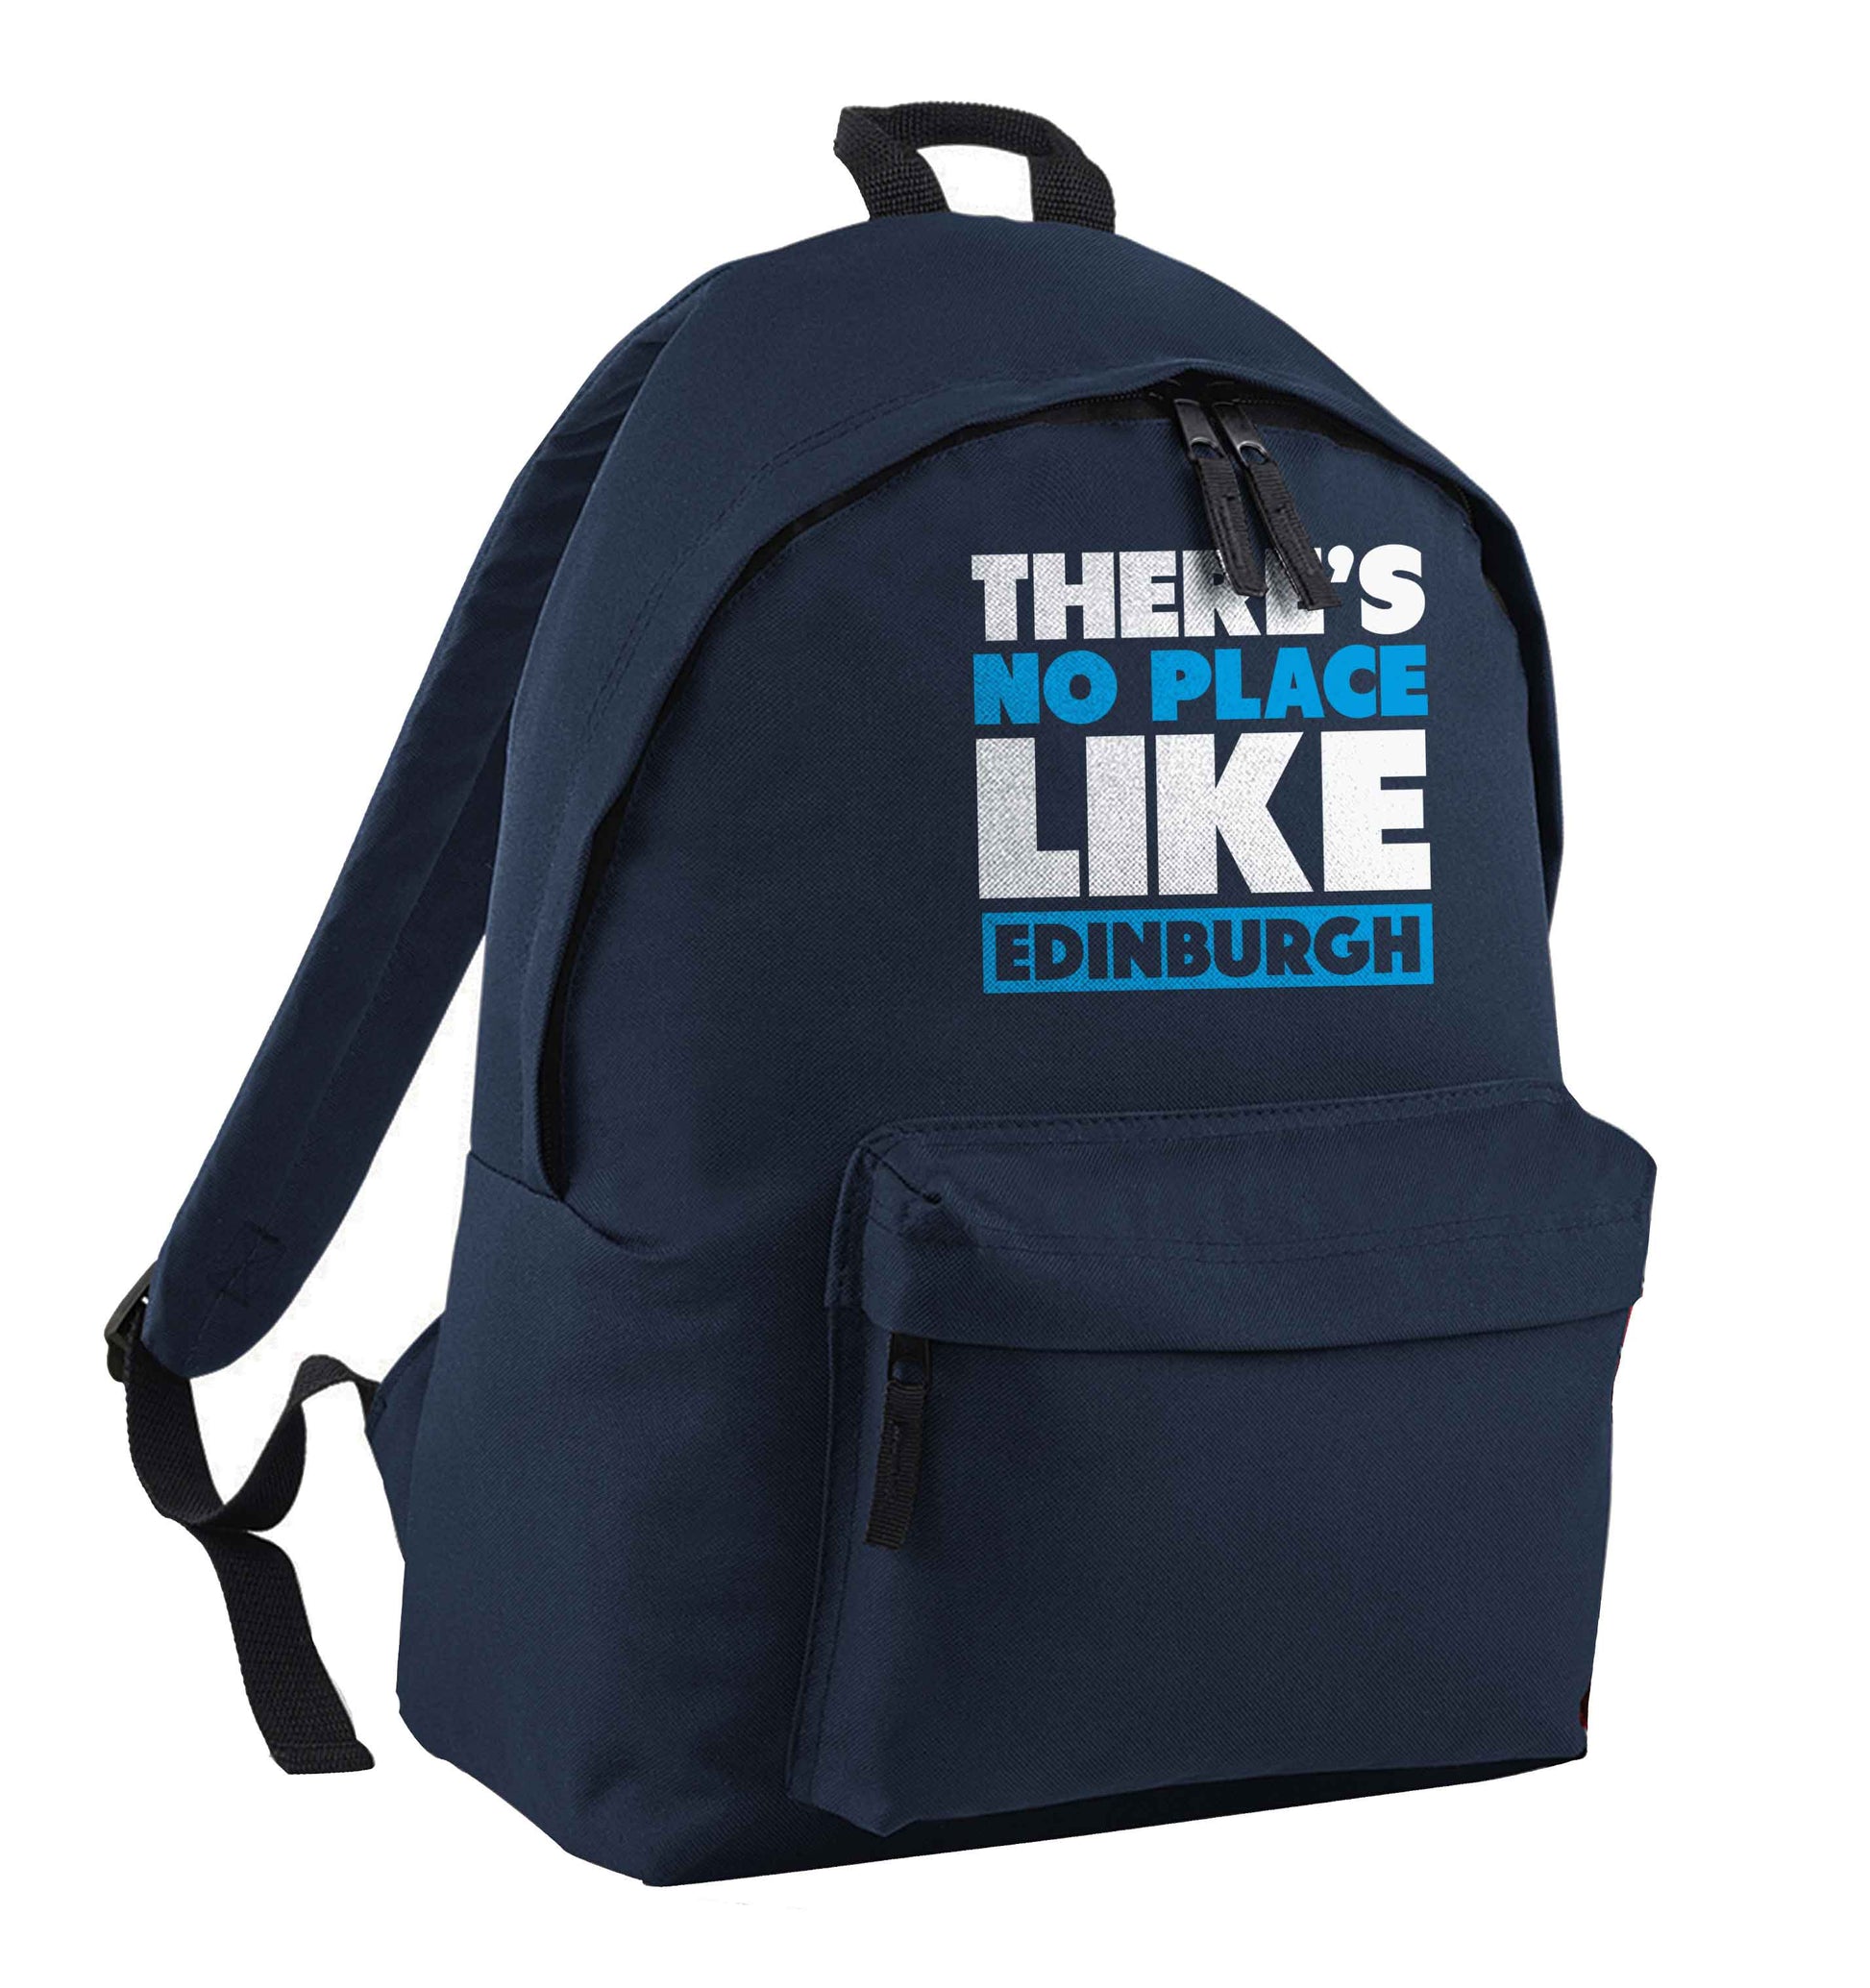 There's no place like Edinburgh navy children's backpack